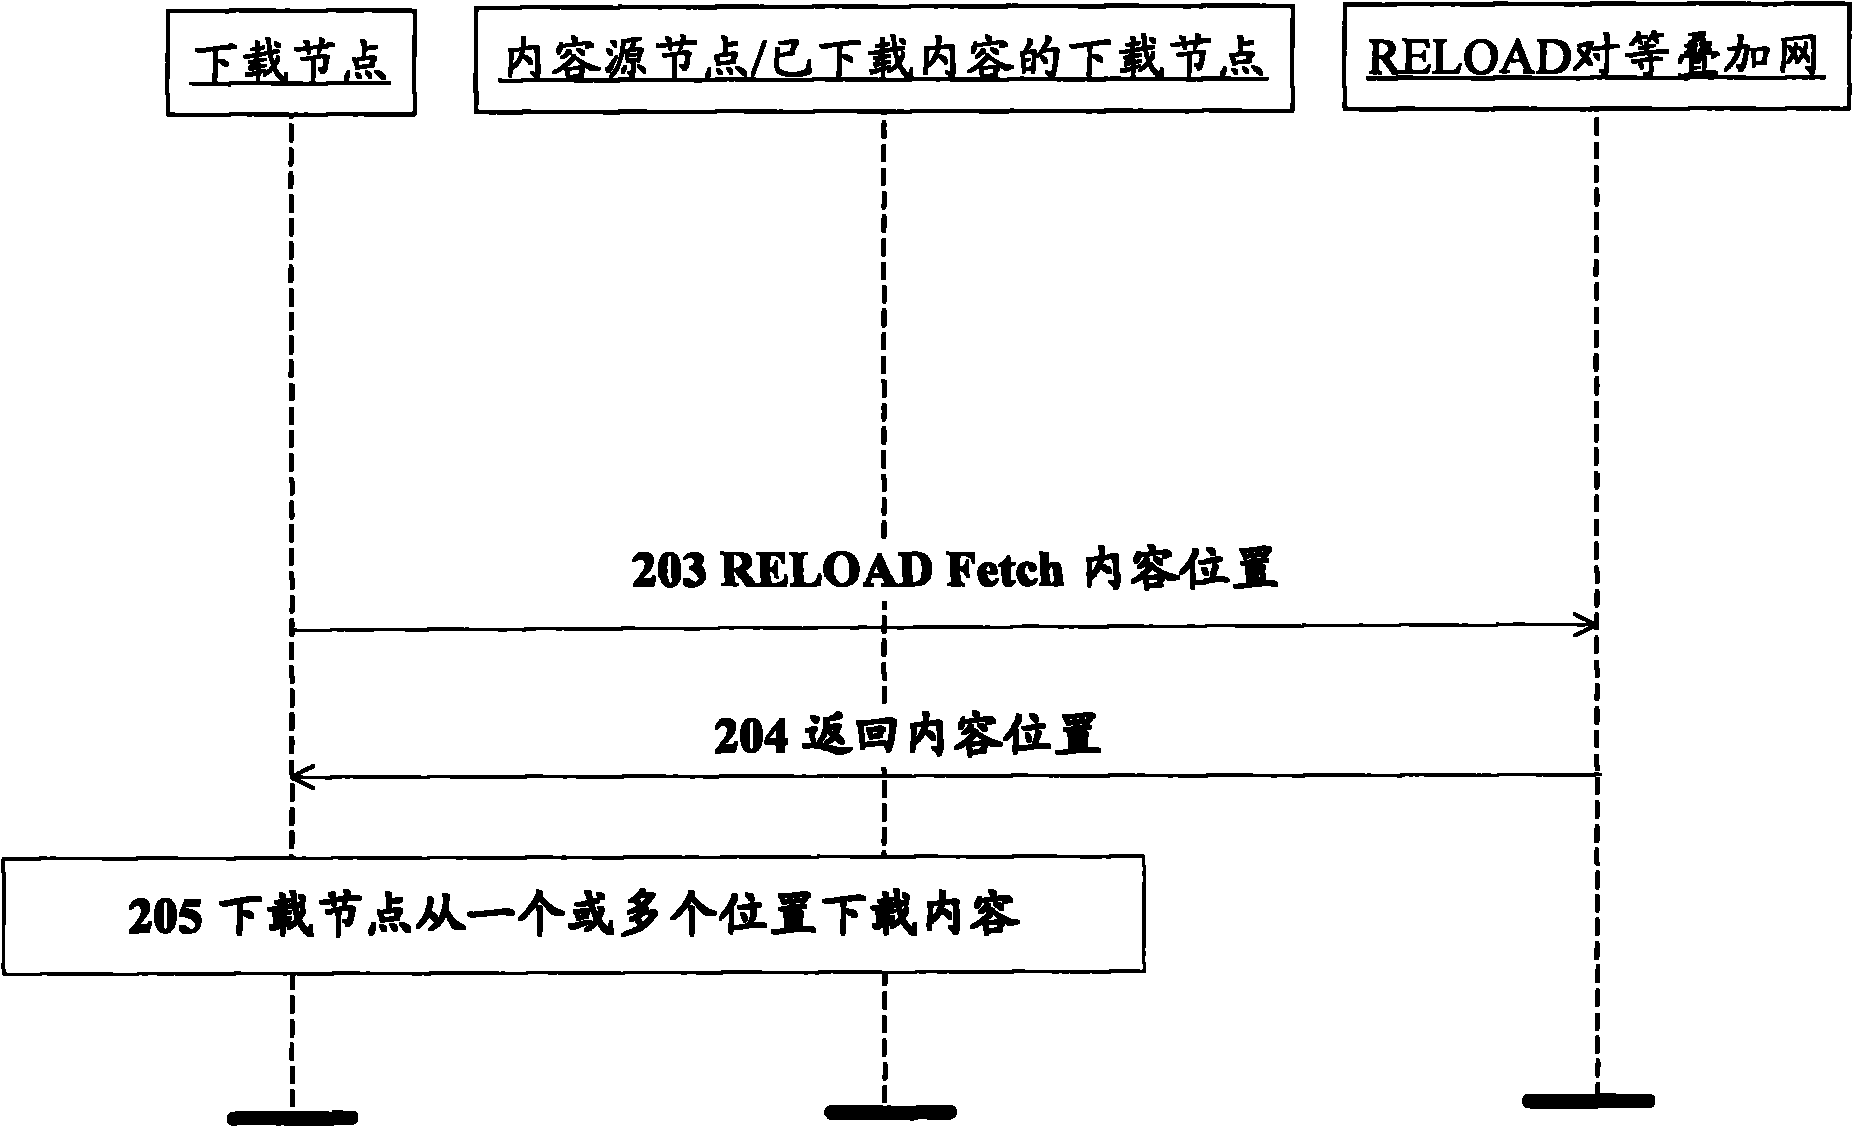 Peer-to-peer overlay network, method for storing service contents and method for downloading same